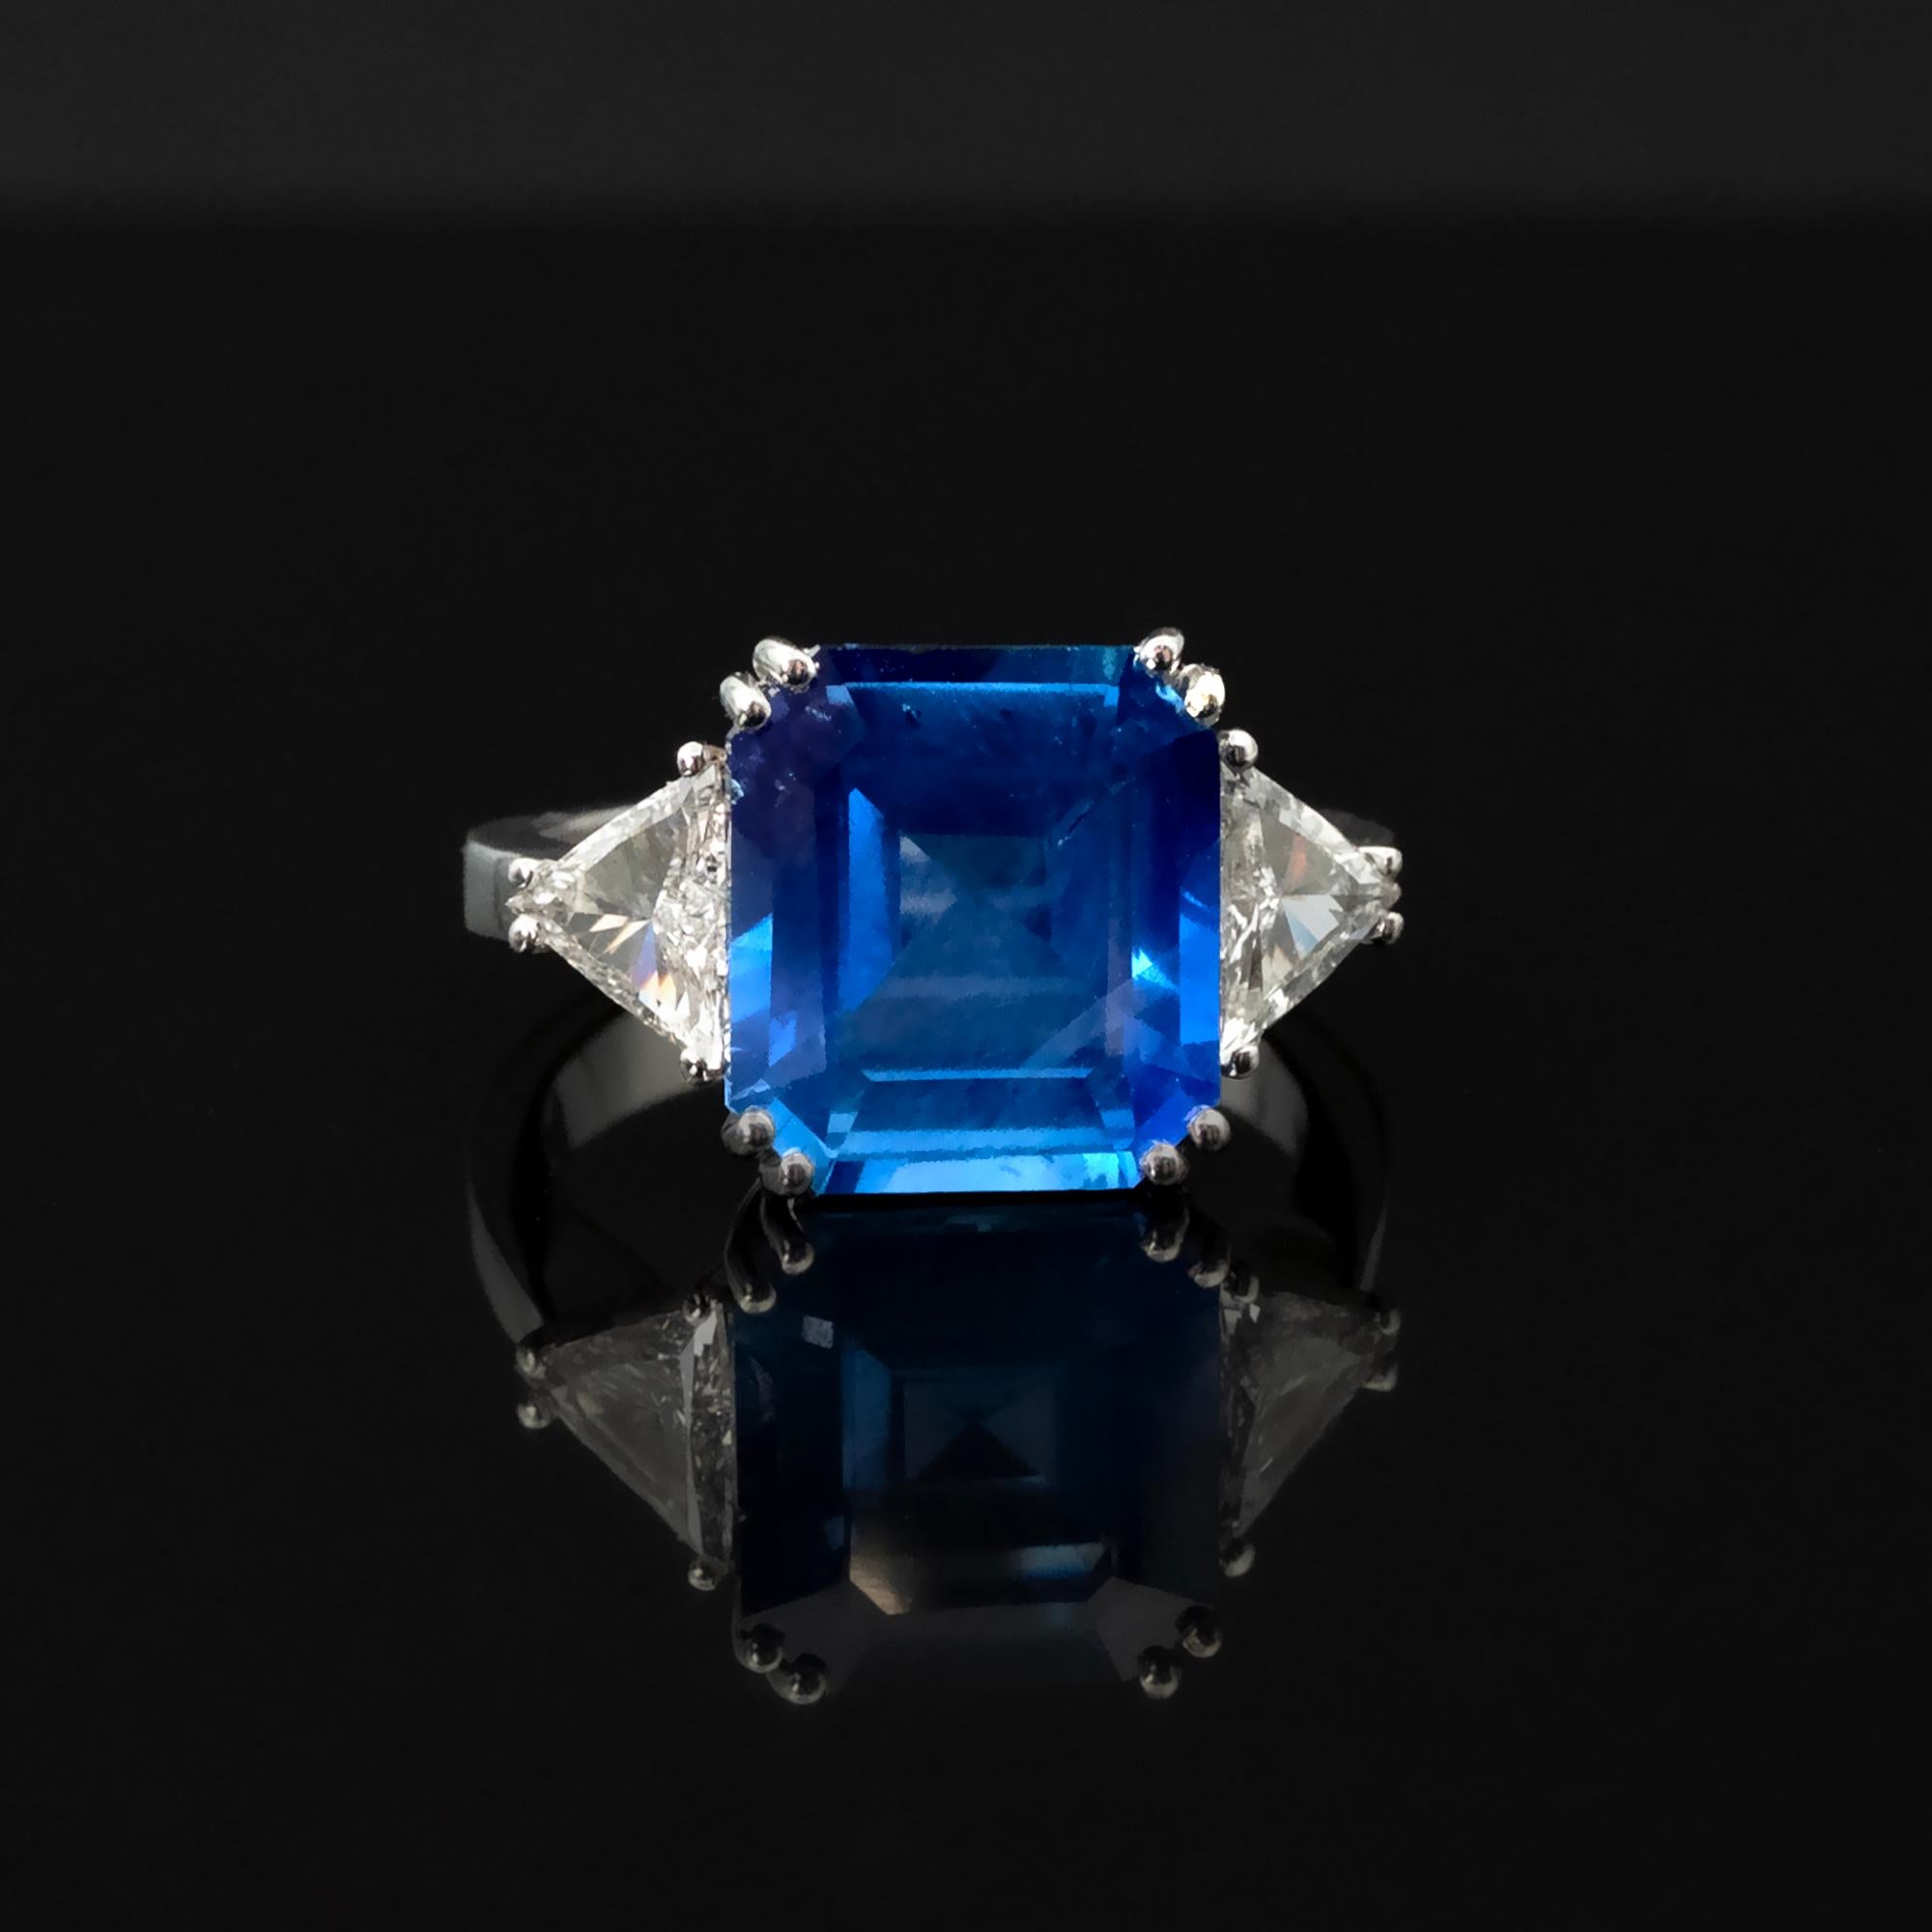 This exquisite engagement ring features a 5.77 carat Natural Sri Lankan (Ceylan) sapphire , brimming with life, with no Heat enhancement — a rarity in fine gemology. The gemstone's exceptional layout and octagonal emerald cut amplify its natural